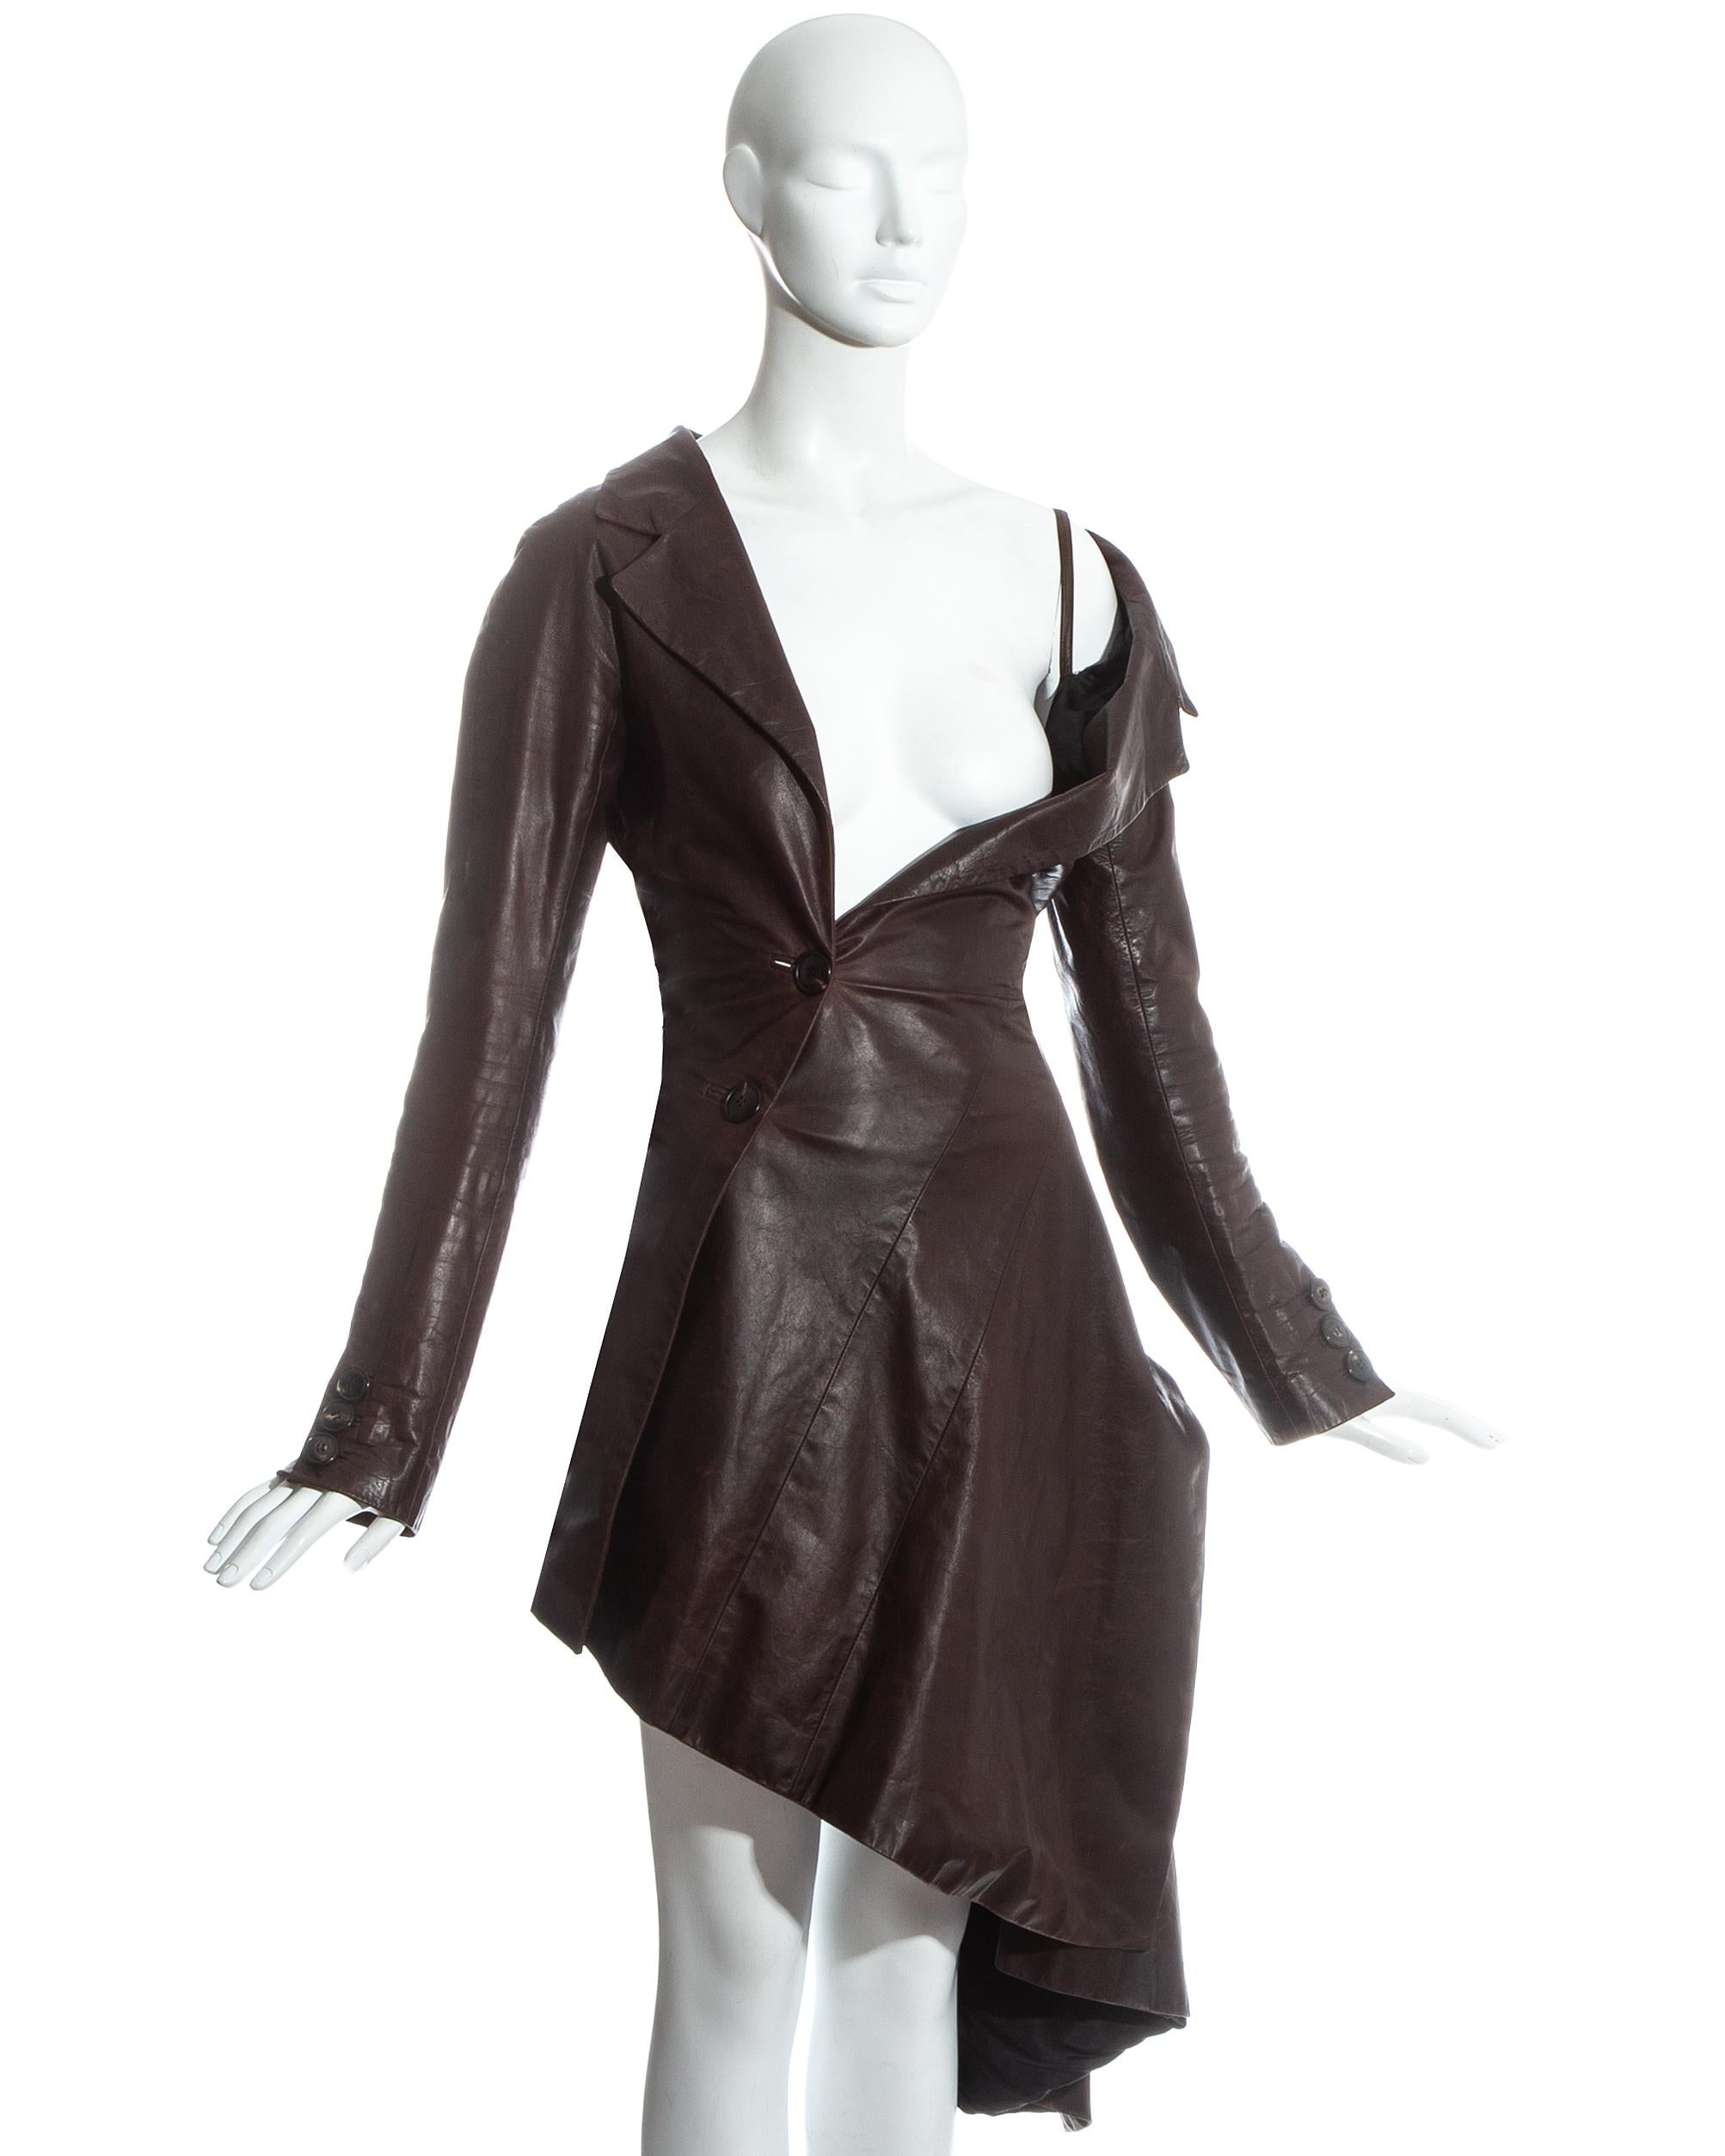 John Galliano; Brown distressed leather twisted coat dress. Bias cut panels, two button fastenings and one exposed shoulder with built in shoulder strap.

Fall-Winter 2000